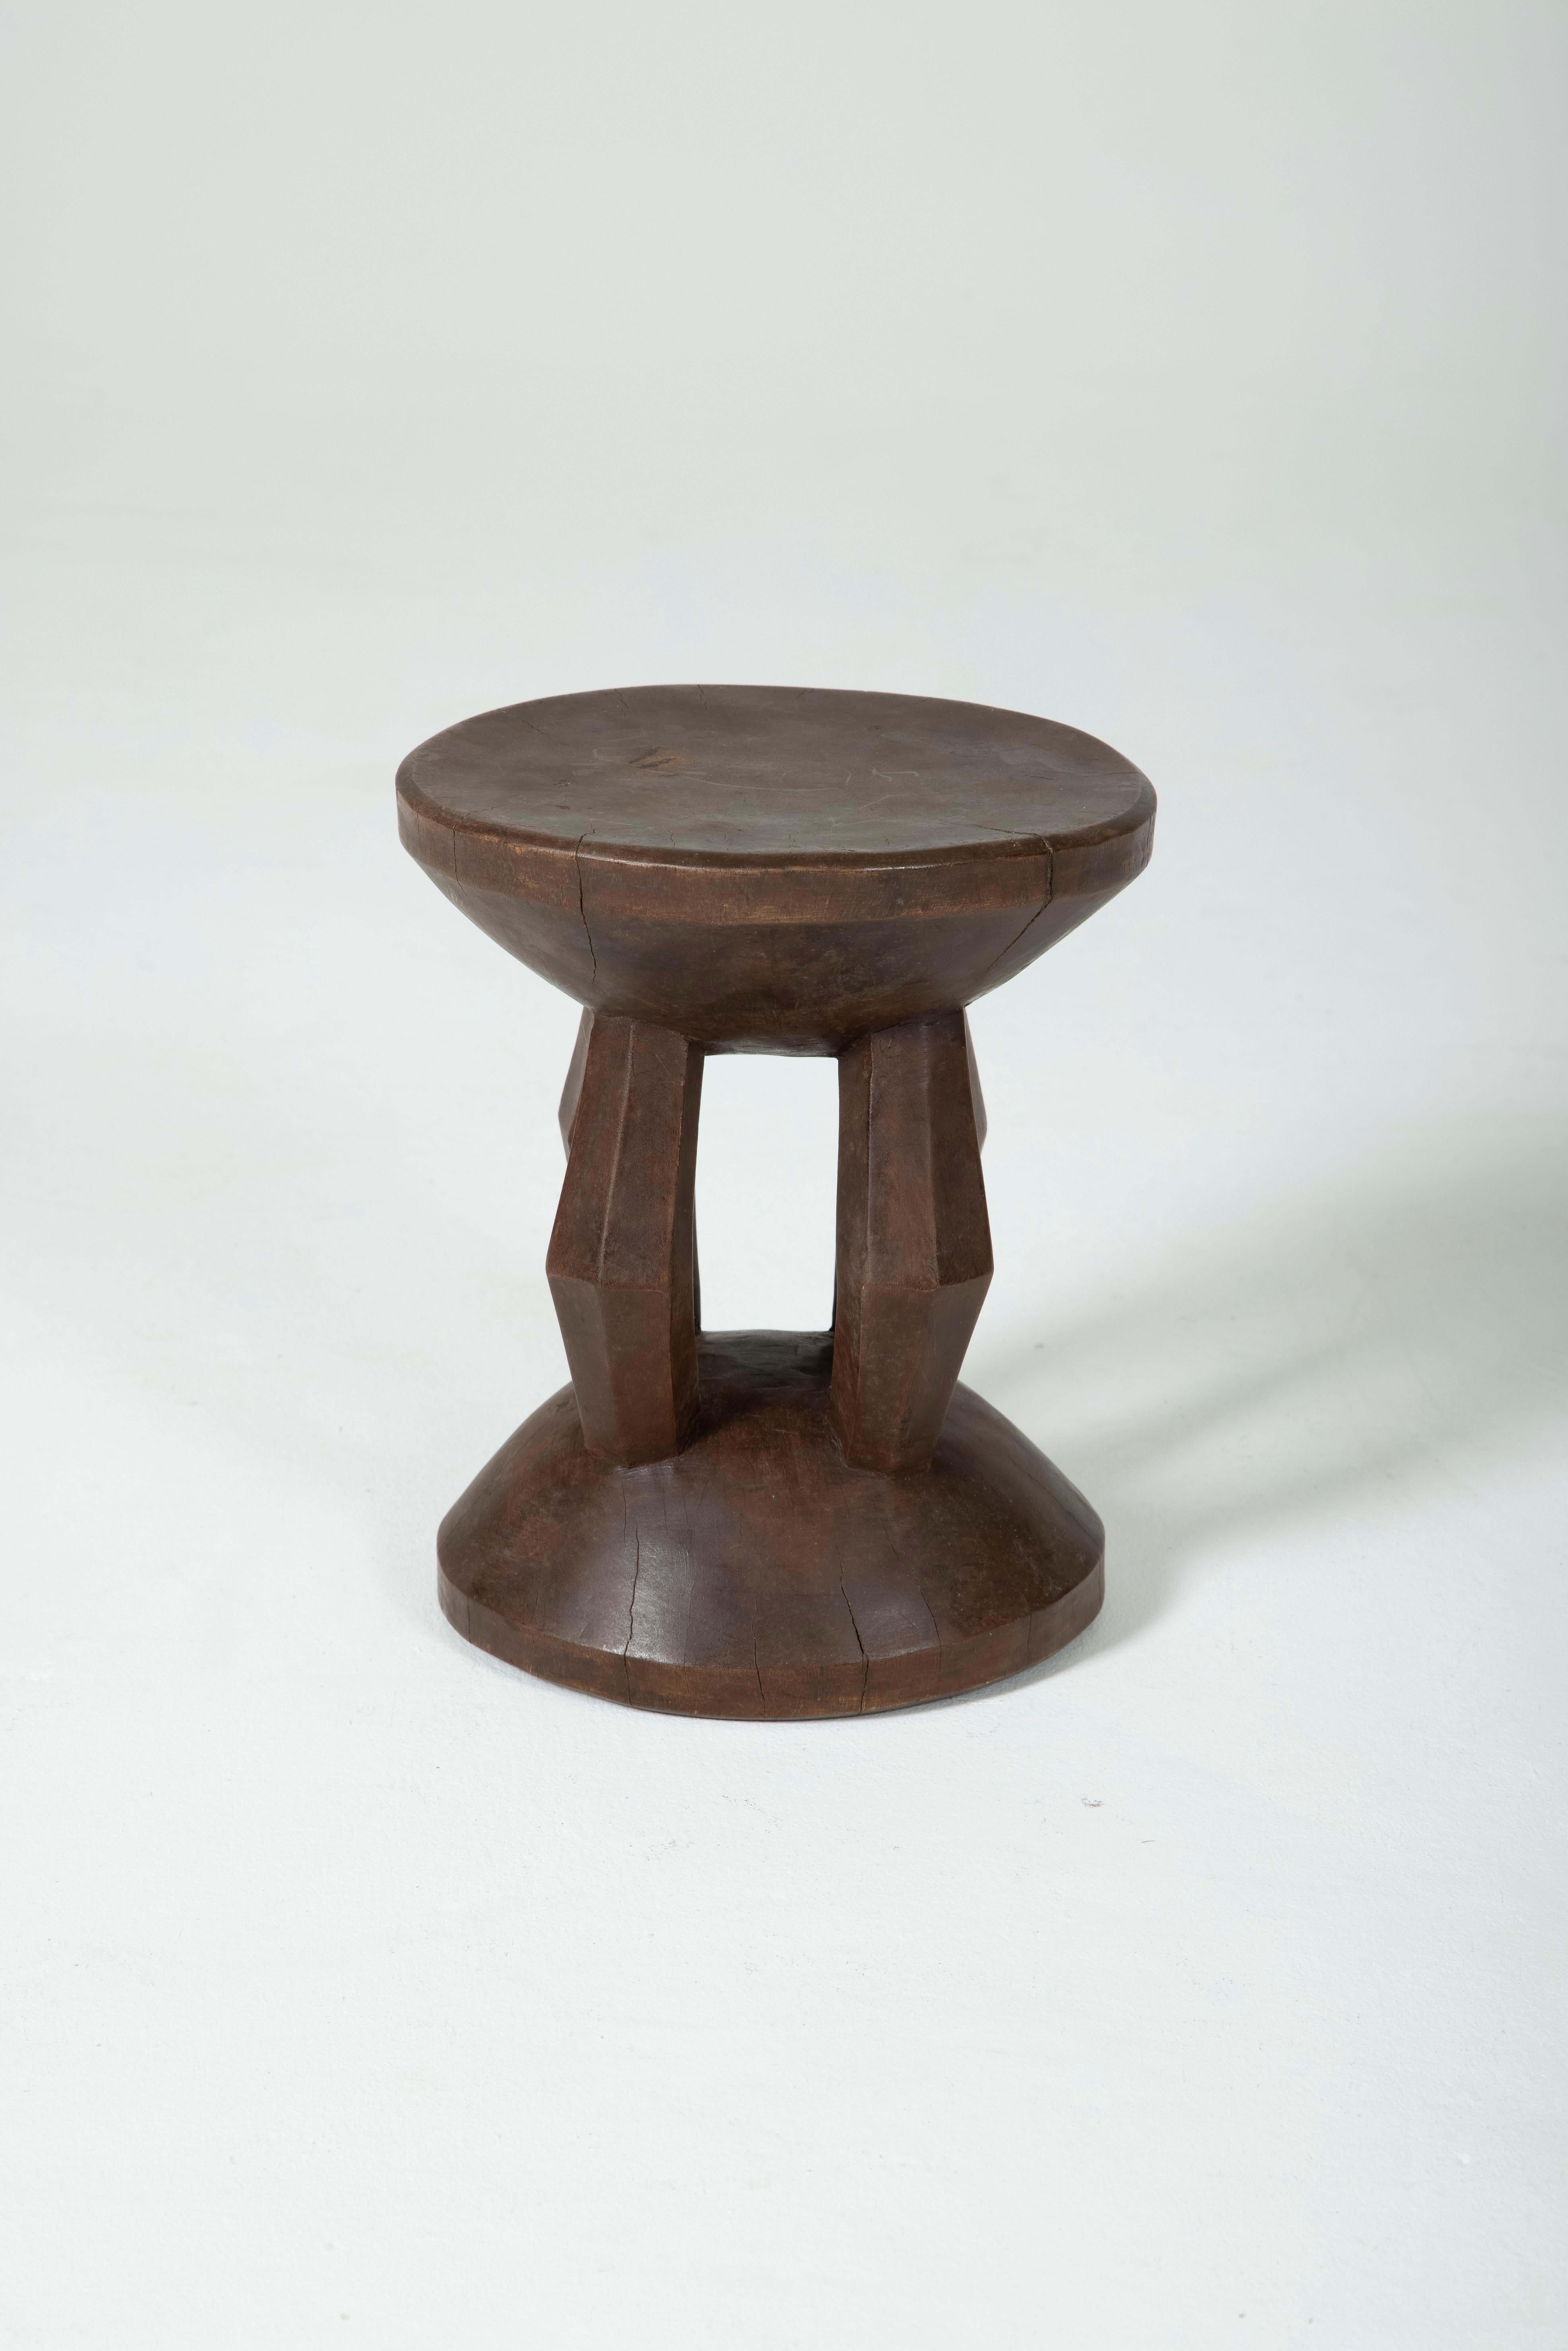 Dogon stool in exotic wood. Stool cut from one piece of wood. Beautiful patina of wood. Very good condition.